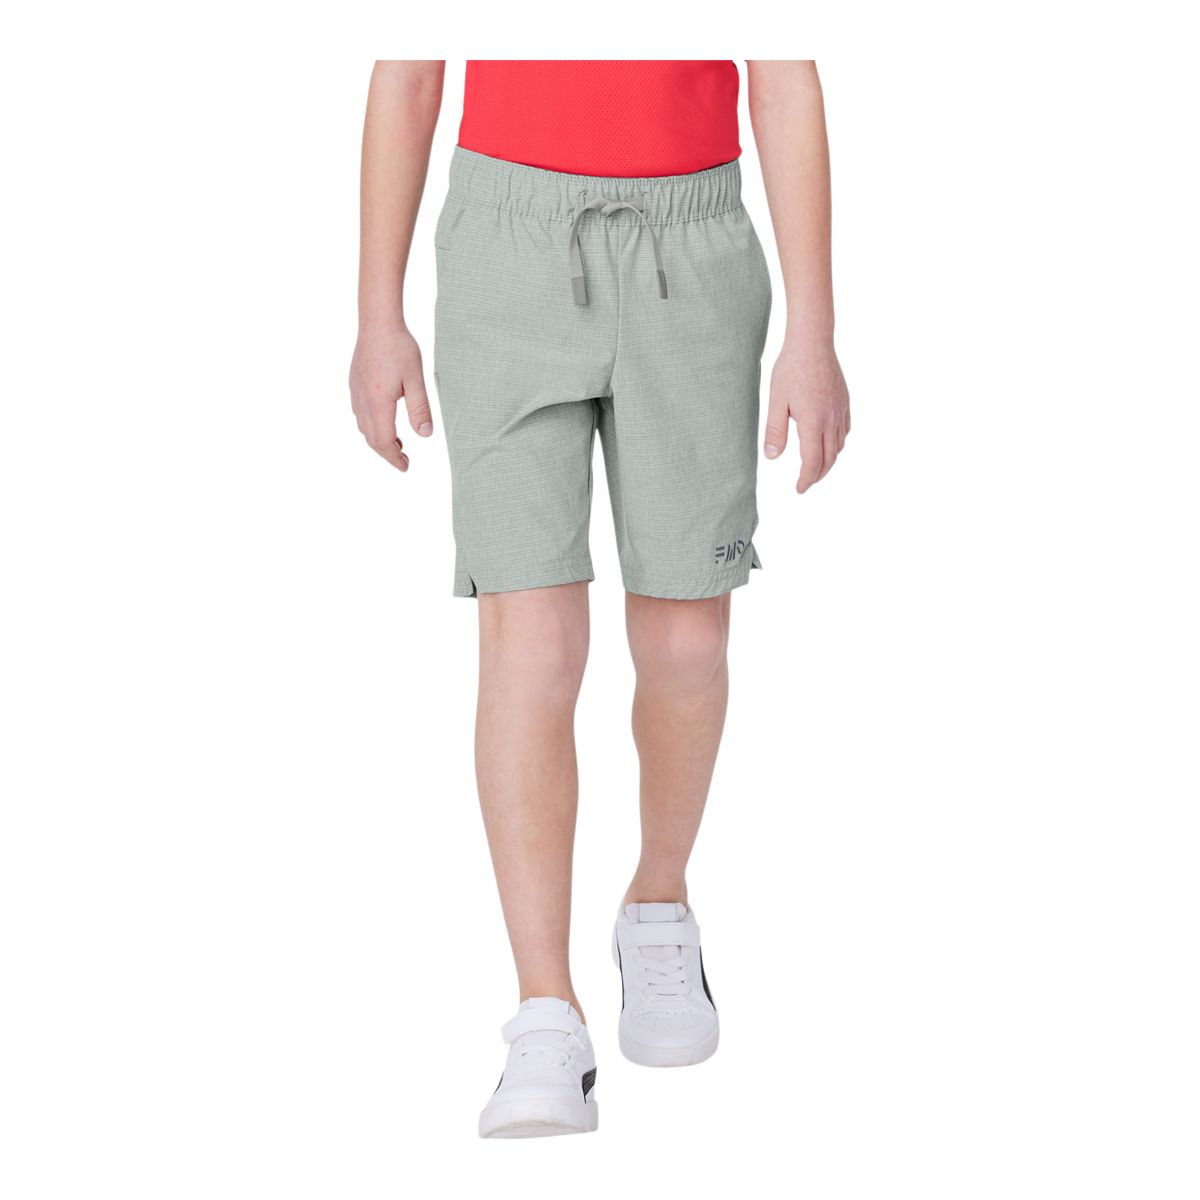 Image of FWD Boys' Active Woven Shorts